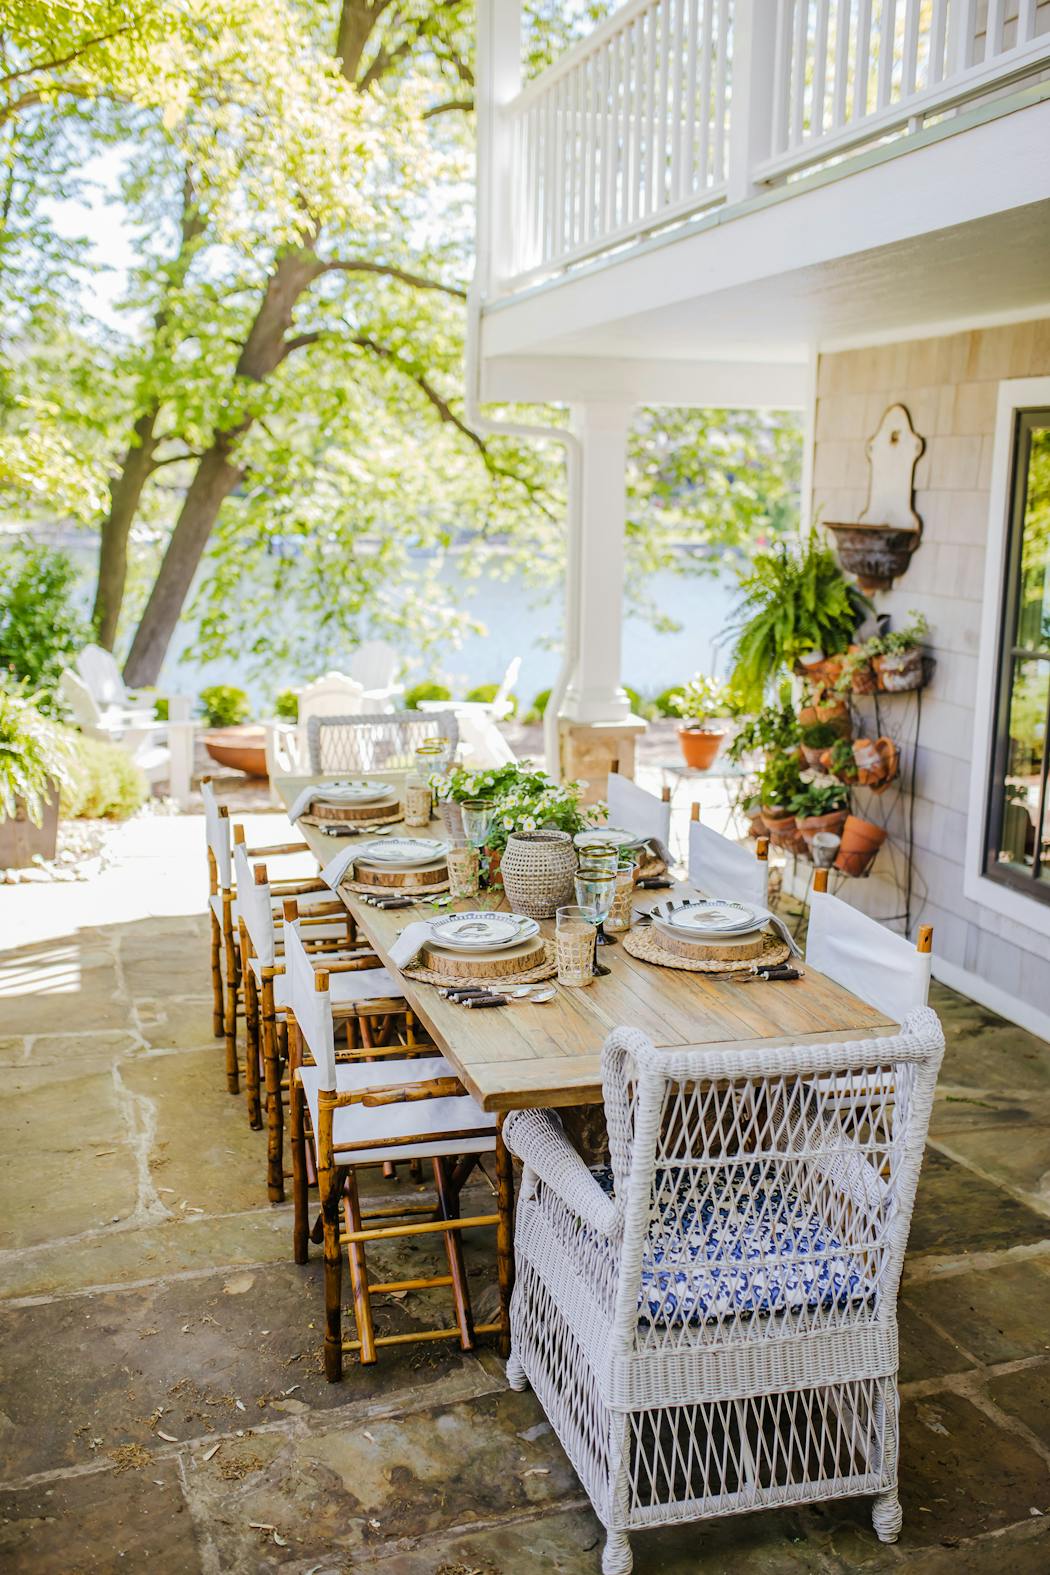 Oversized tables with lots of room for dishes and decorations are a must for outdoor entertaining.